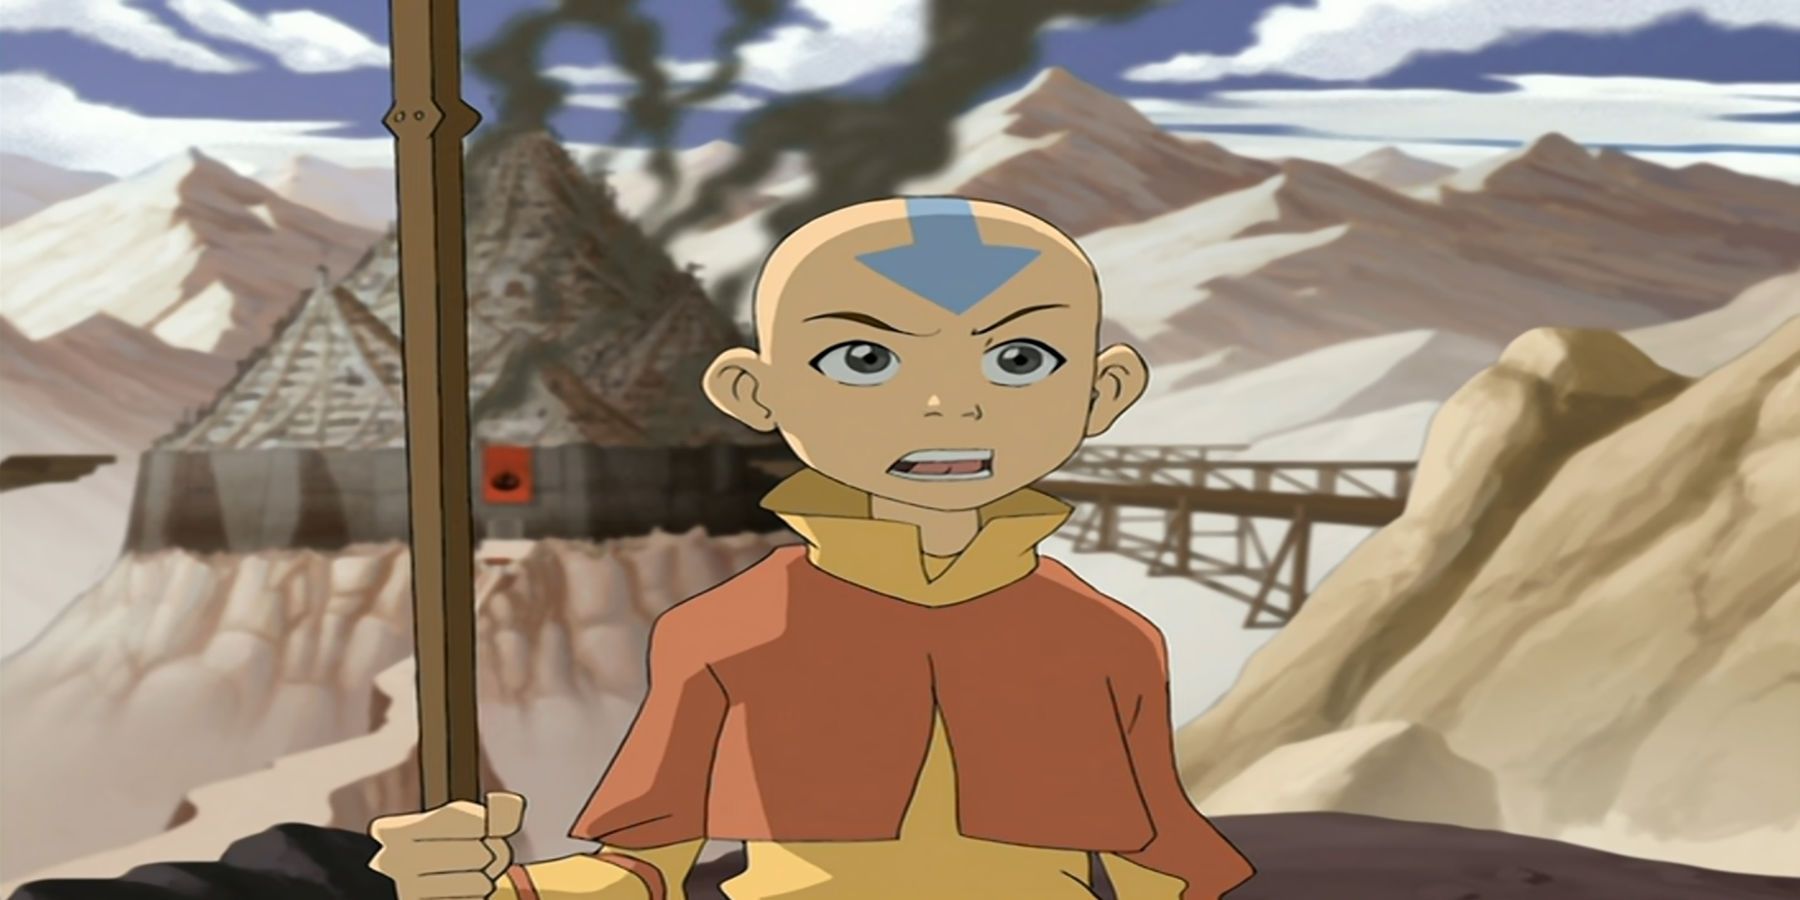 Aang from Avatar the Last Airbender